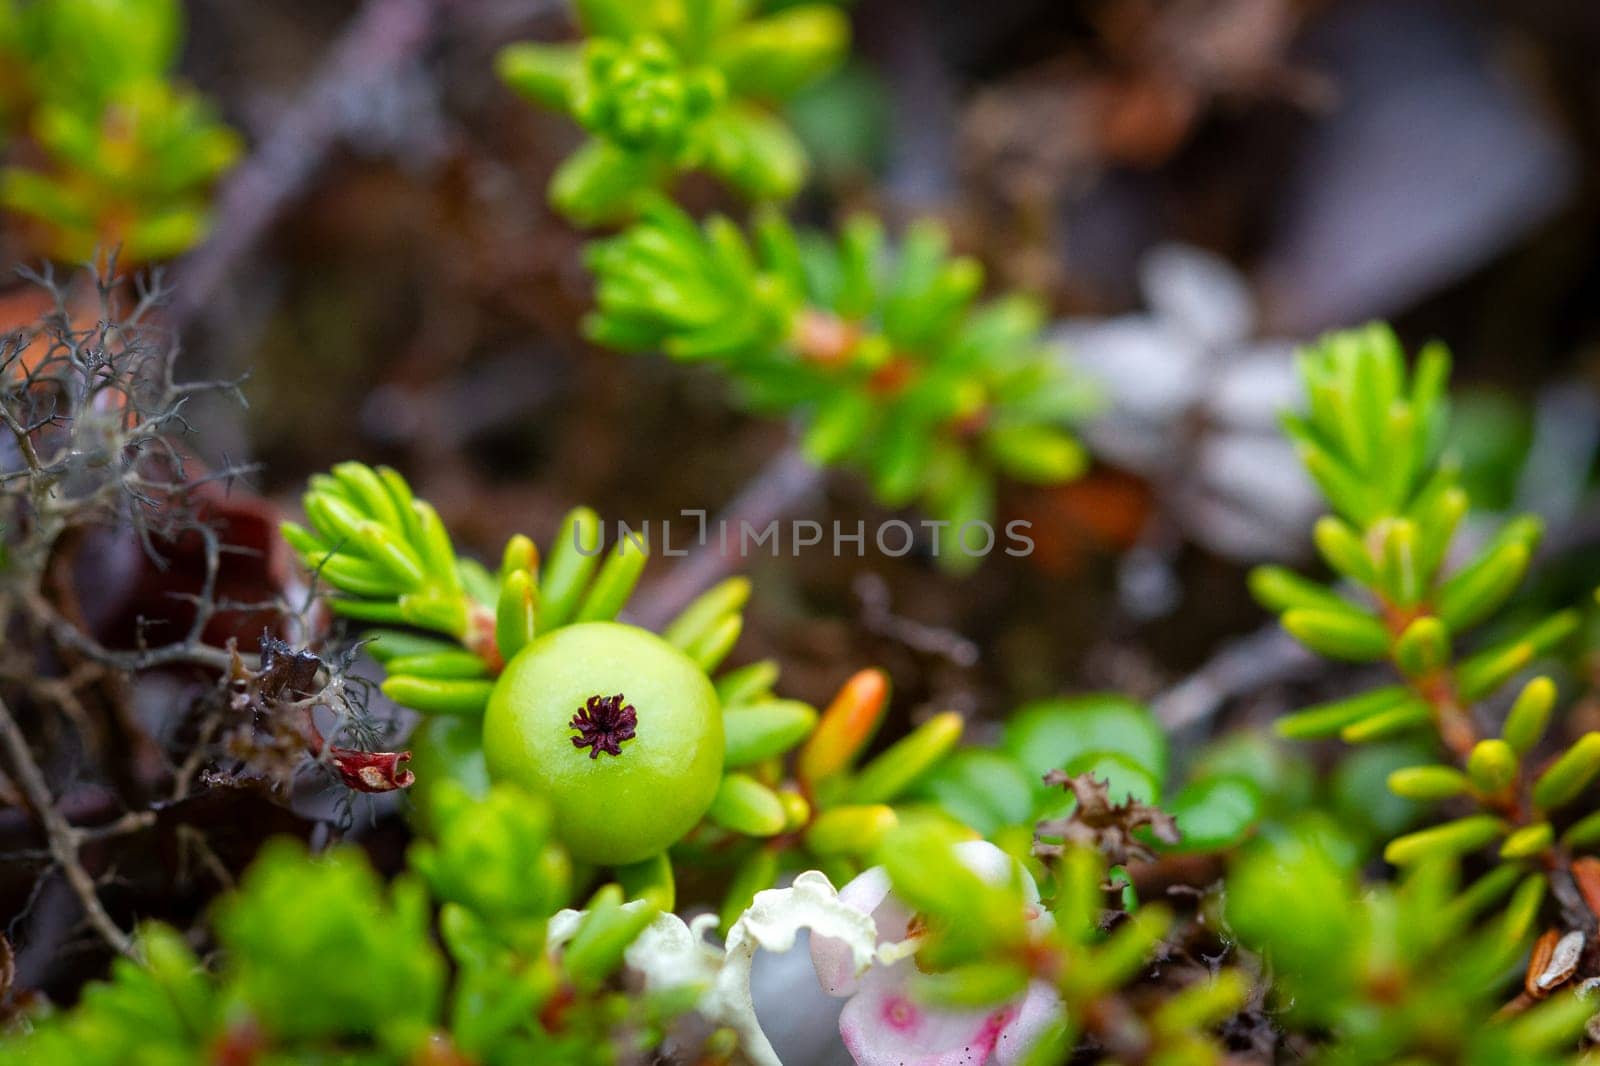 Closeup of a crowberry in its green phase found on the arctic tundra by Granchinho